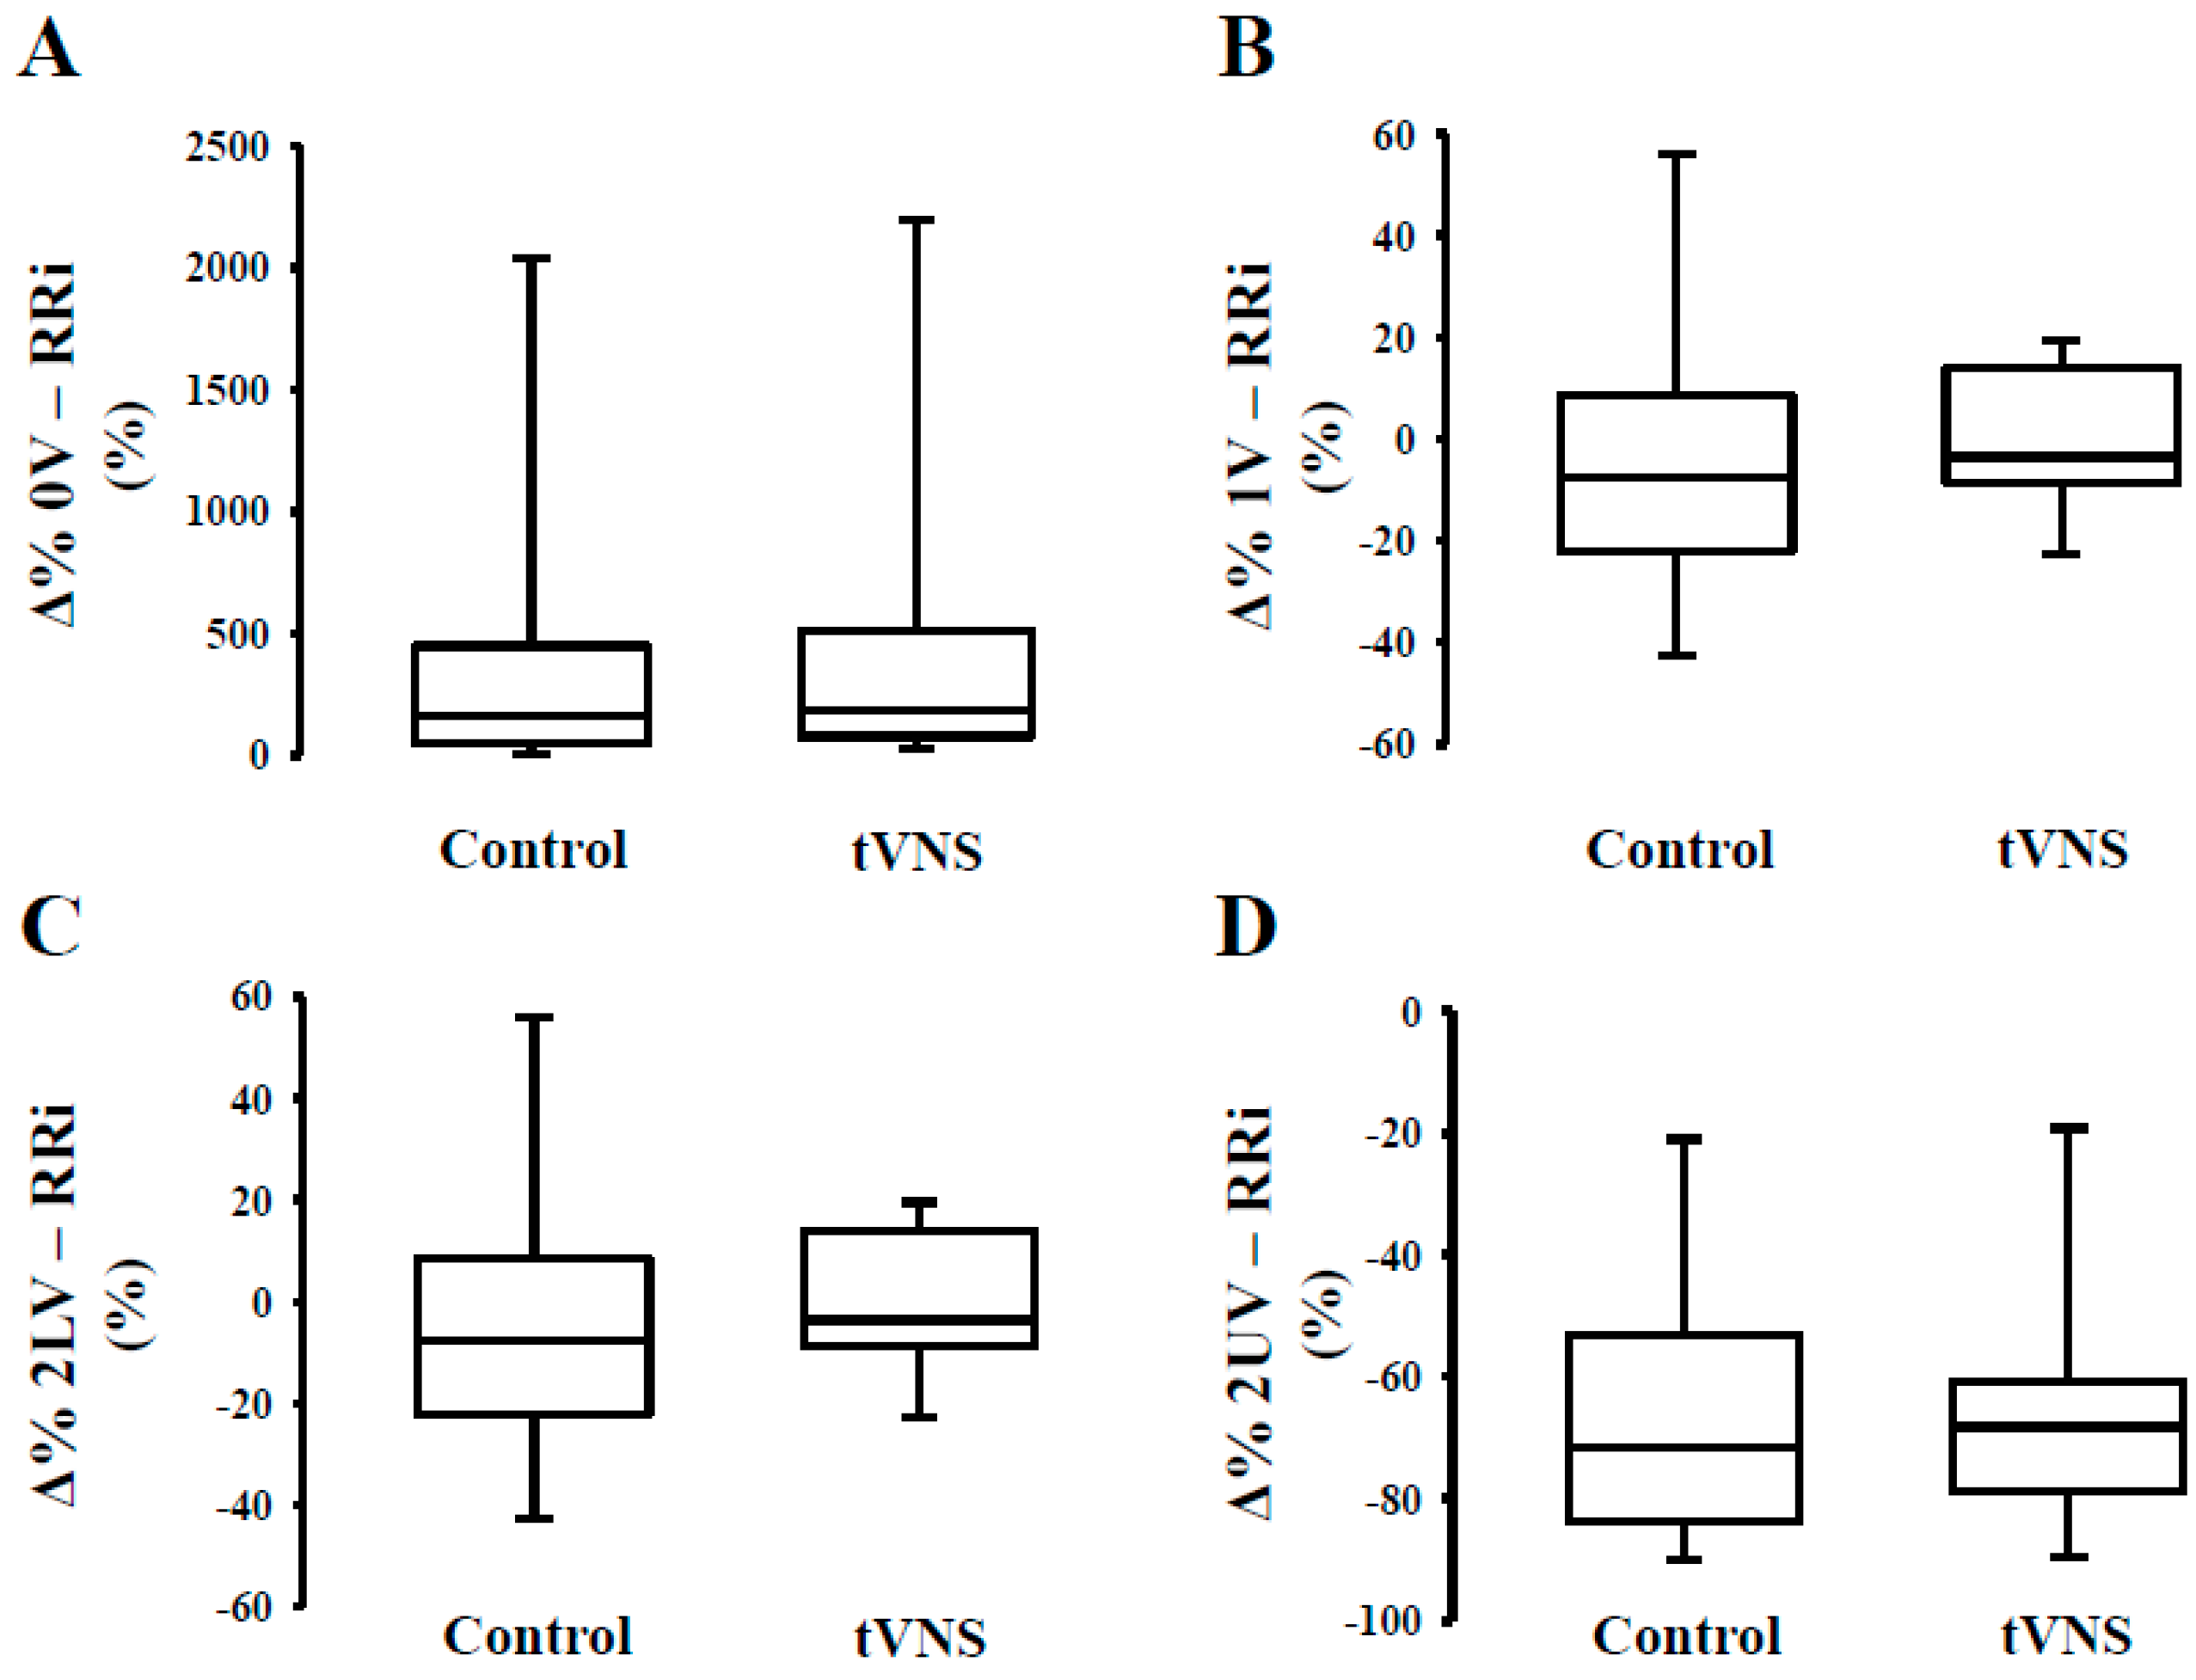 Jcm Free Full Text Cardiac And Peripheral Autonomic Responses To Orthostatic Stress During Transcutaneous Vagus Nerve Stimulation In Healthy Subjects Html